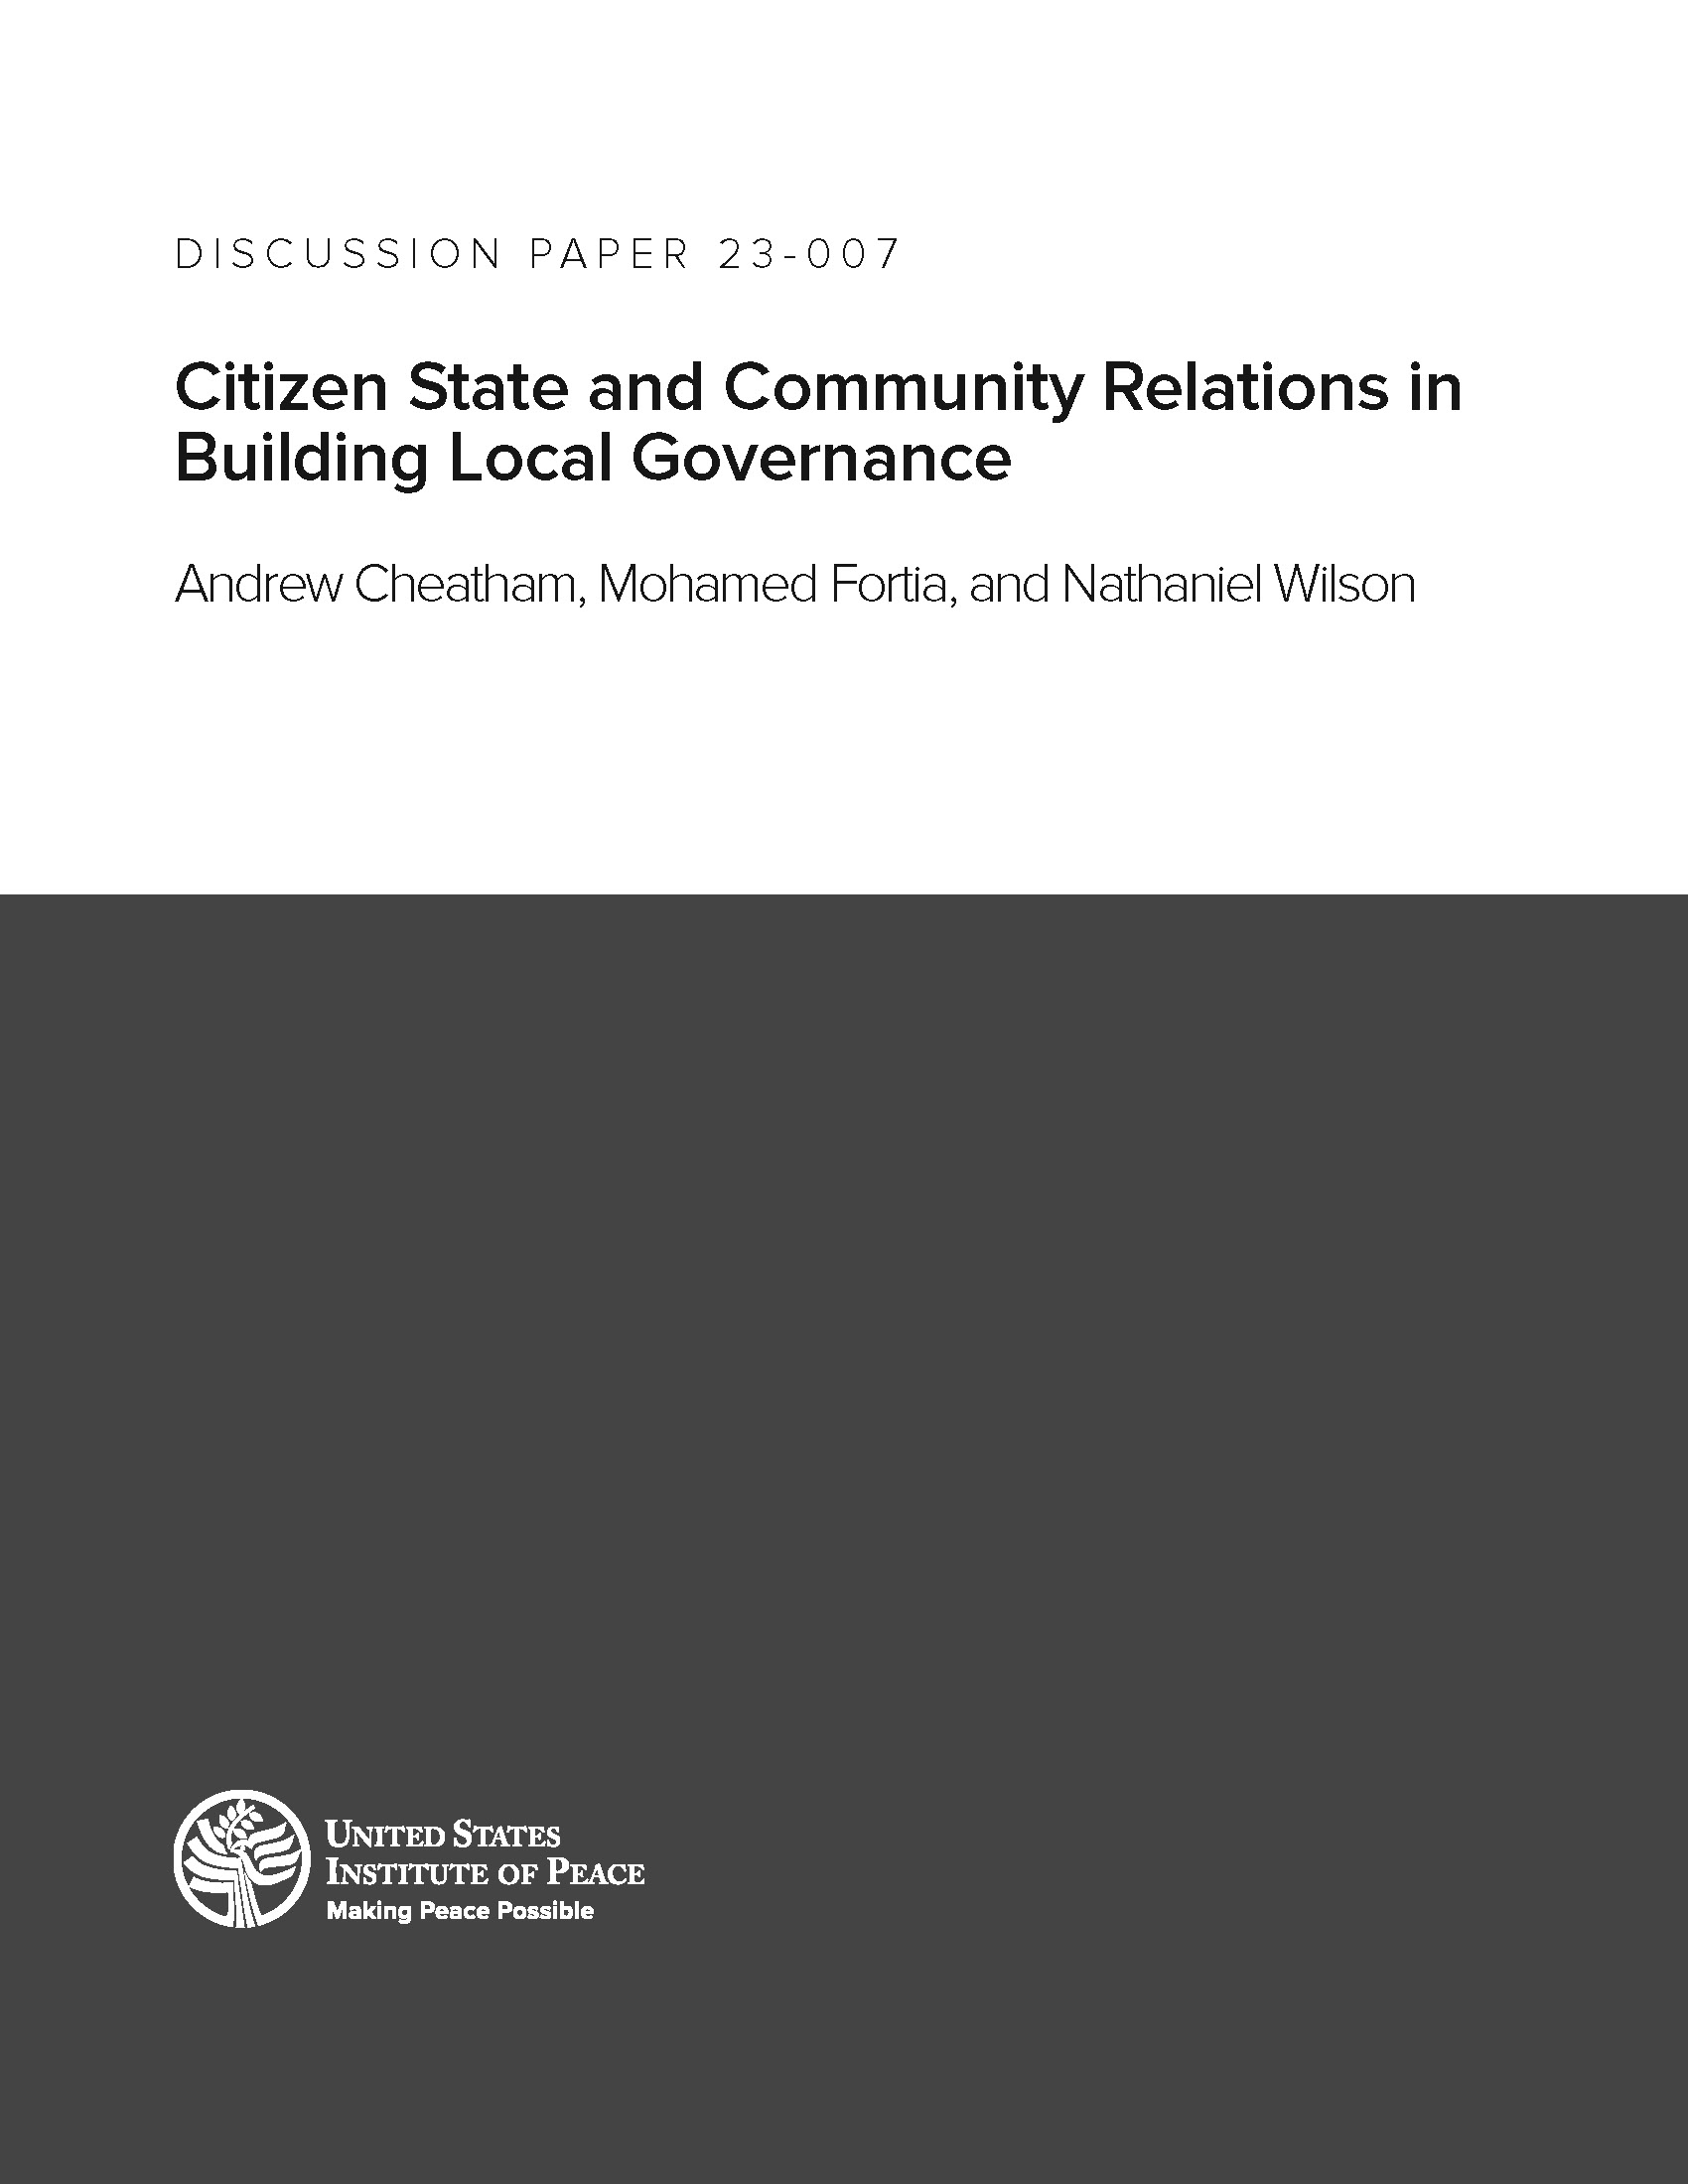 Citizen State and Community Relations in Building Local Governance report cover